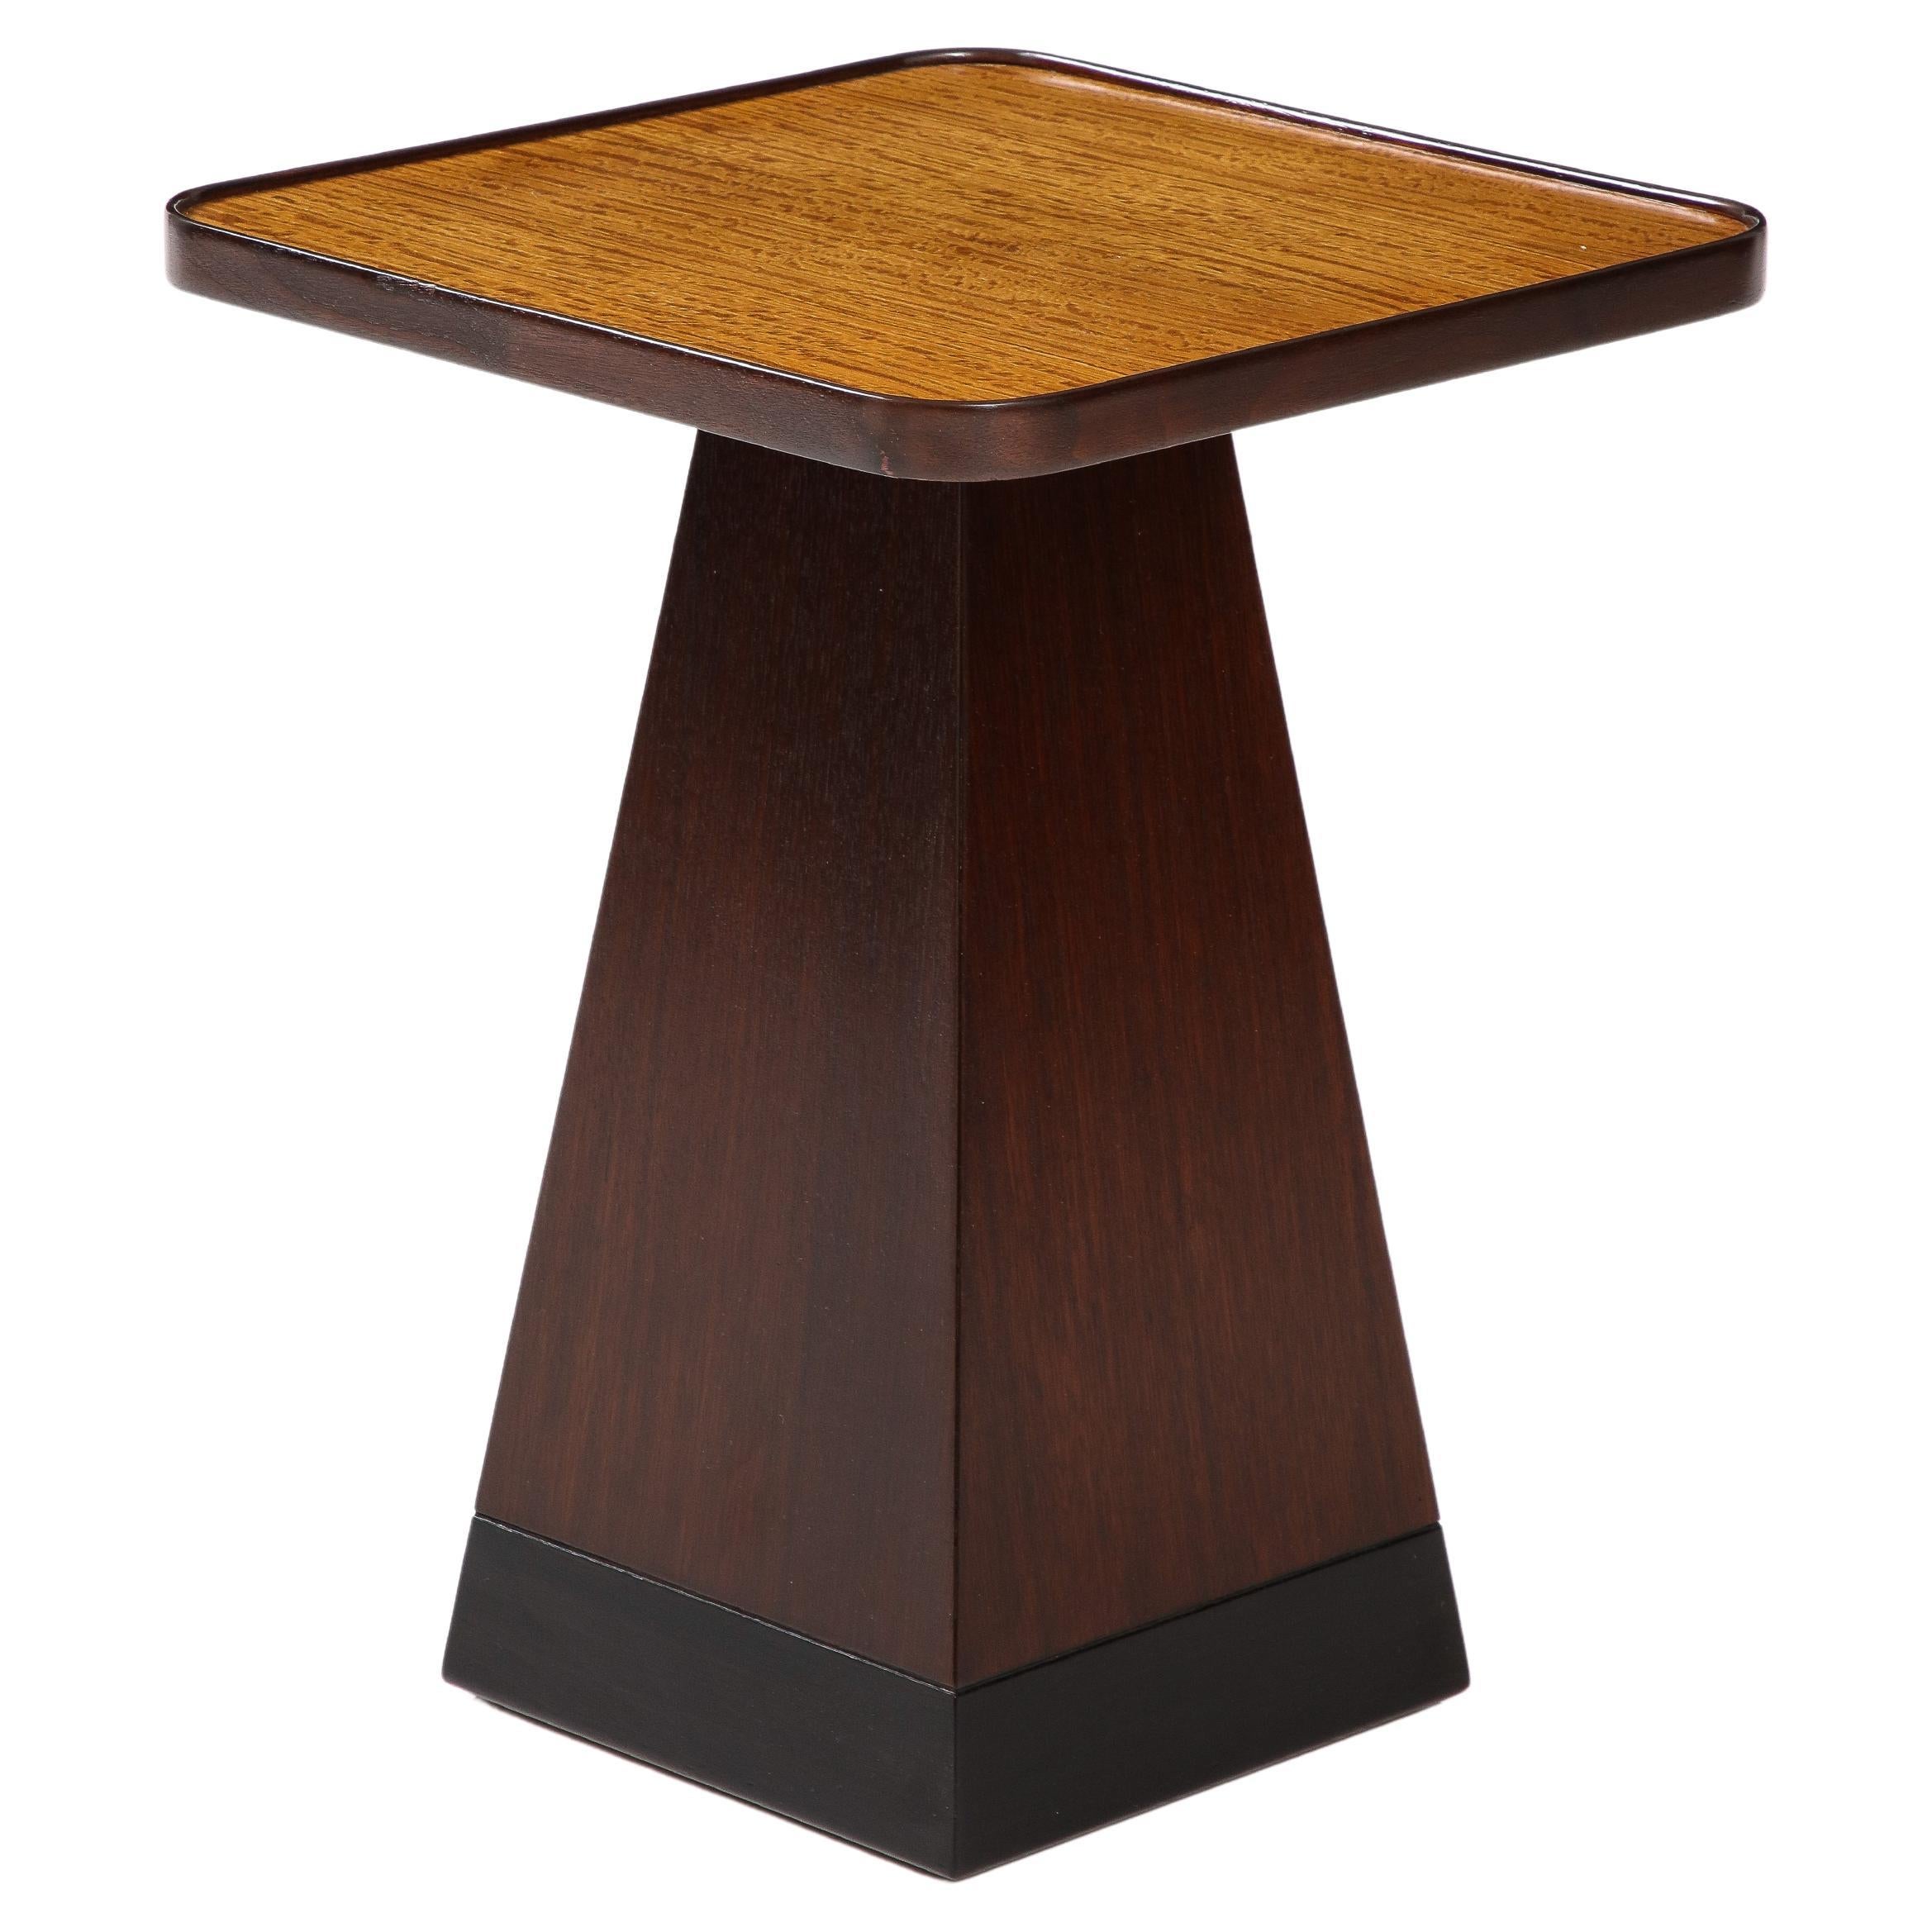 1970's Architectural Walnut Square End Table